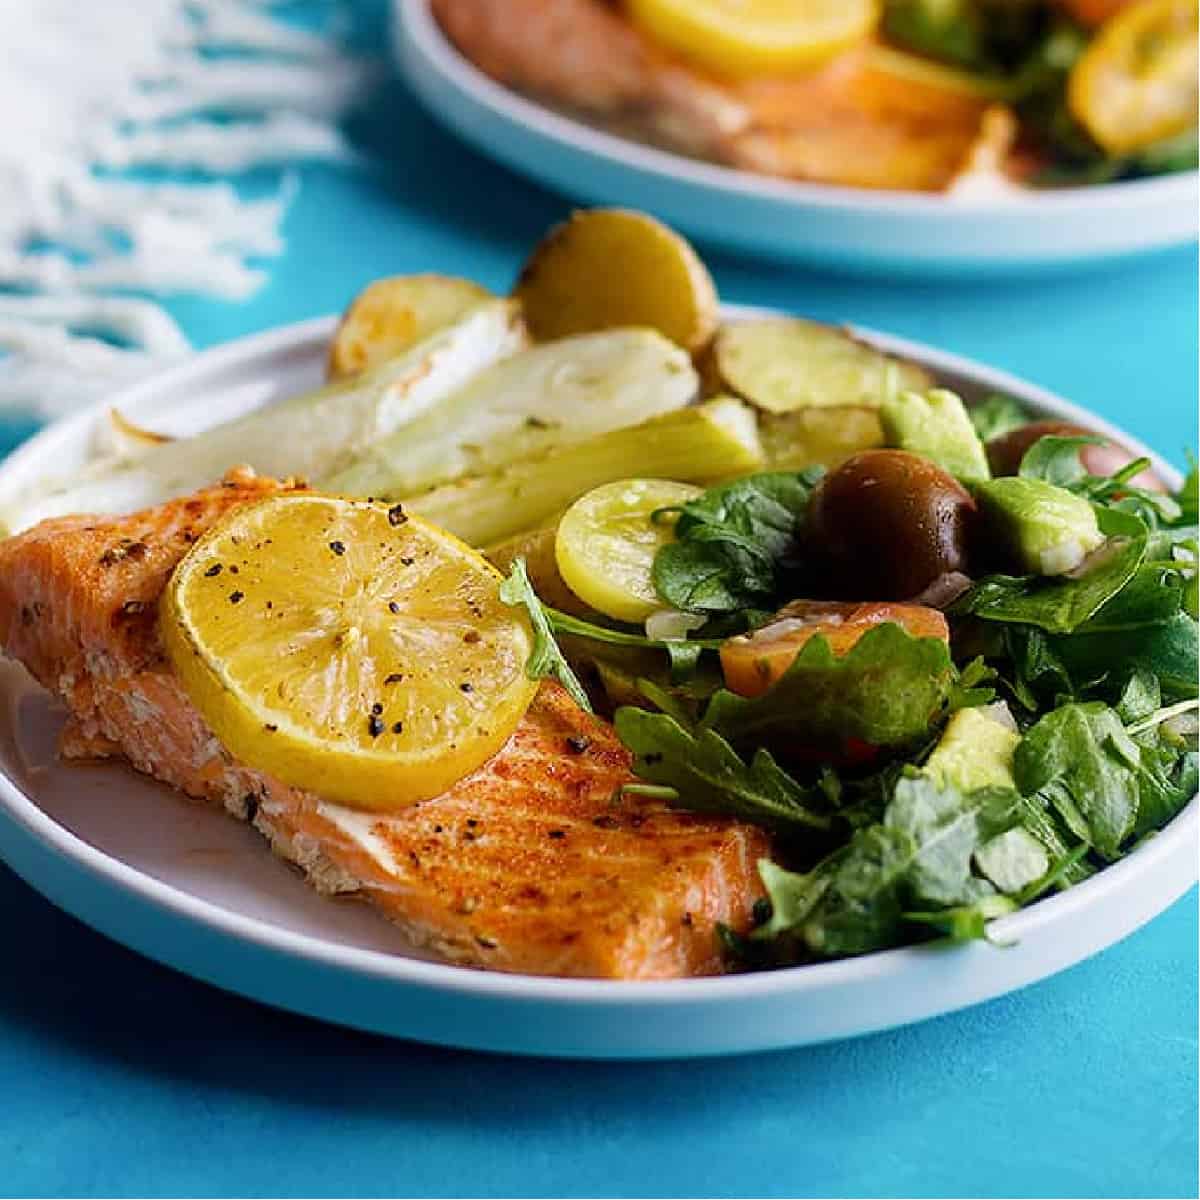 easy healthy dinner ideas - Here is an easy baked salmon fillet recipe. Tender and flavorful salmon fillet are baked on a sheet pan and served with a delicious arugula avocado salad.
